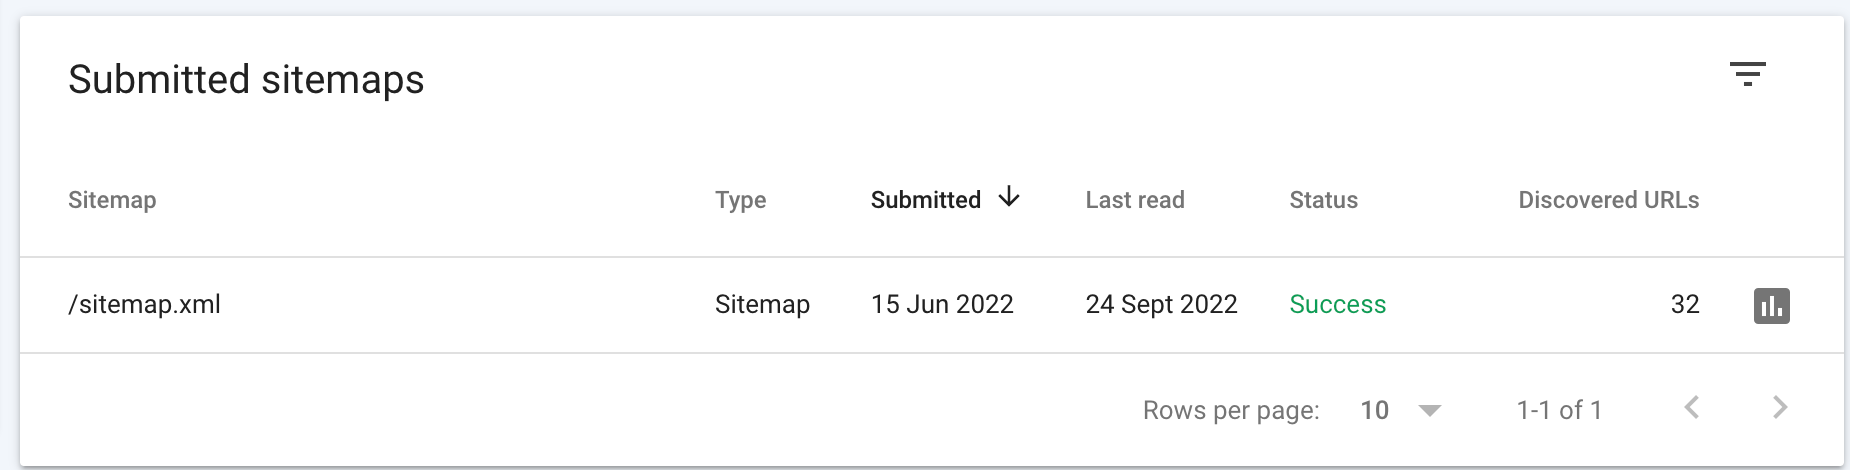 Sitemap Submission - Google Search Console 